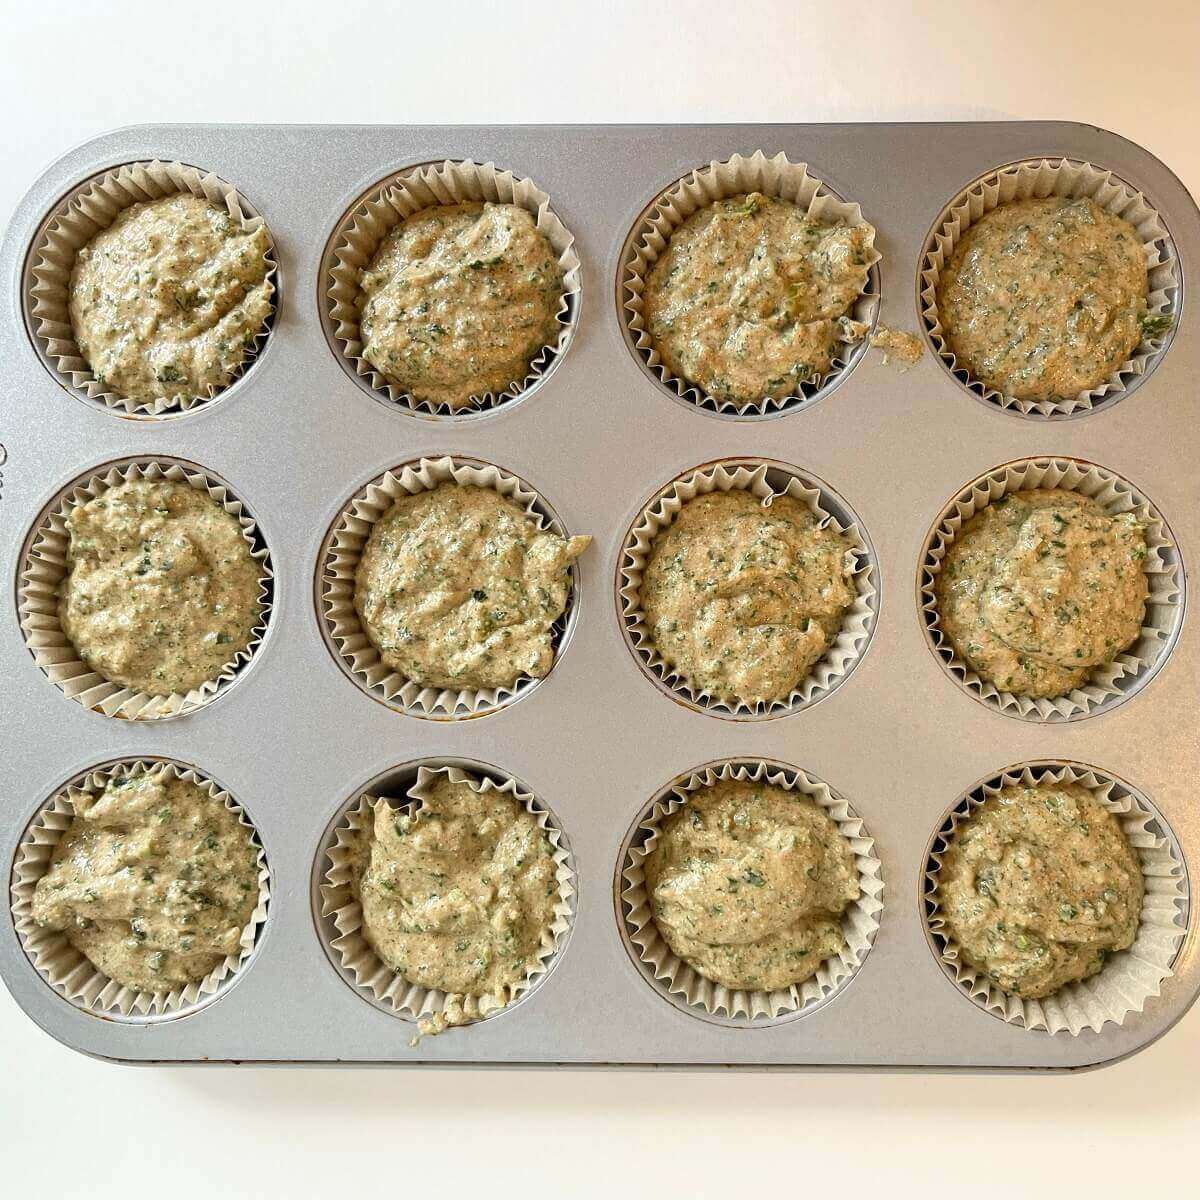 Raw green-flecked muffins in a metal pan.